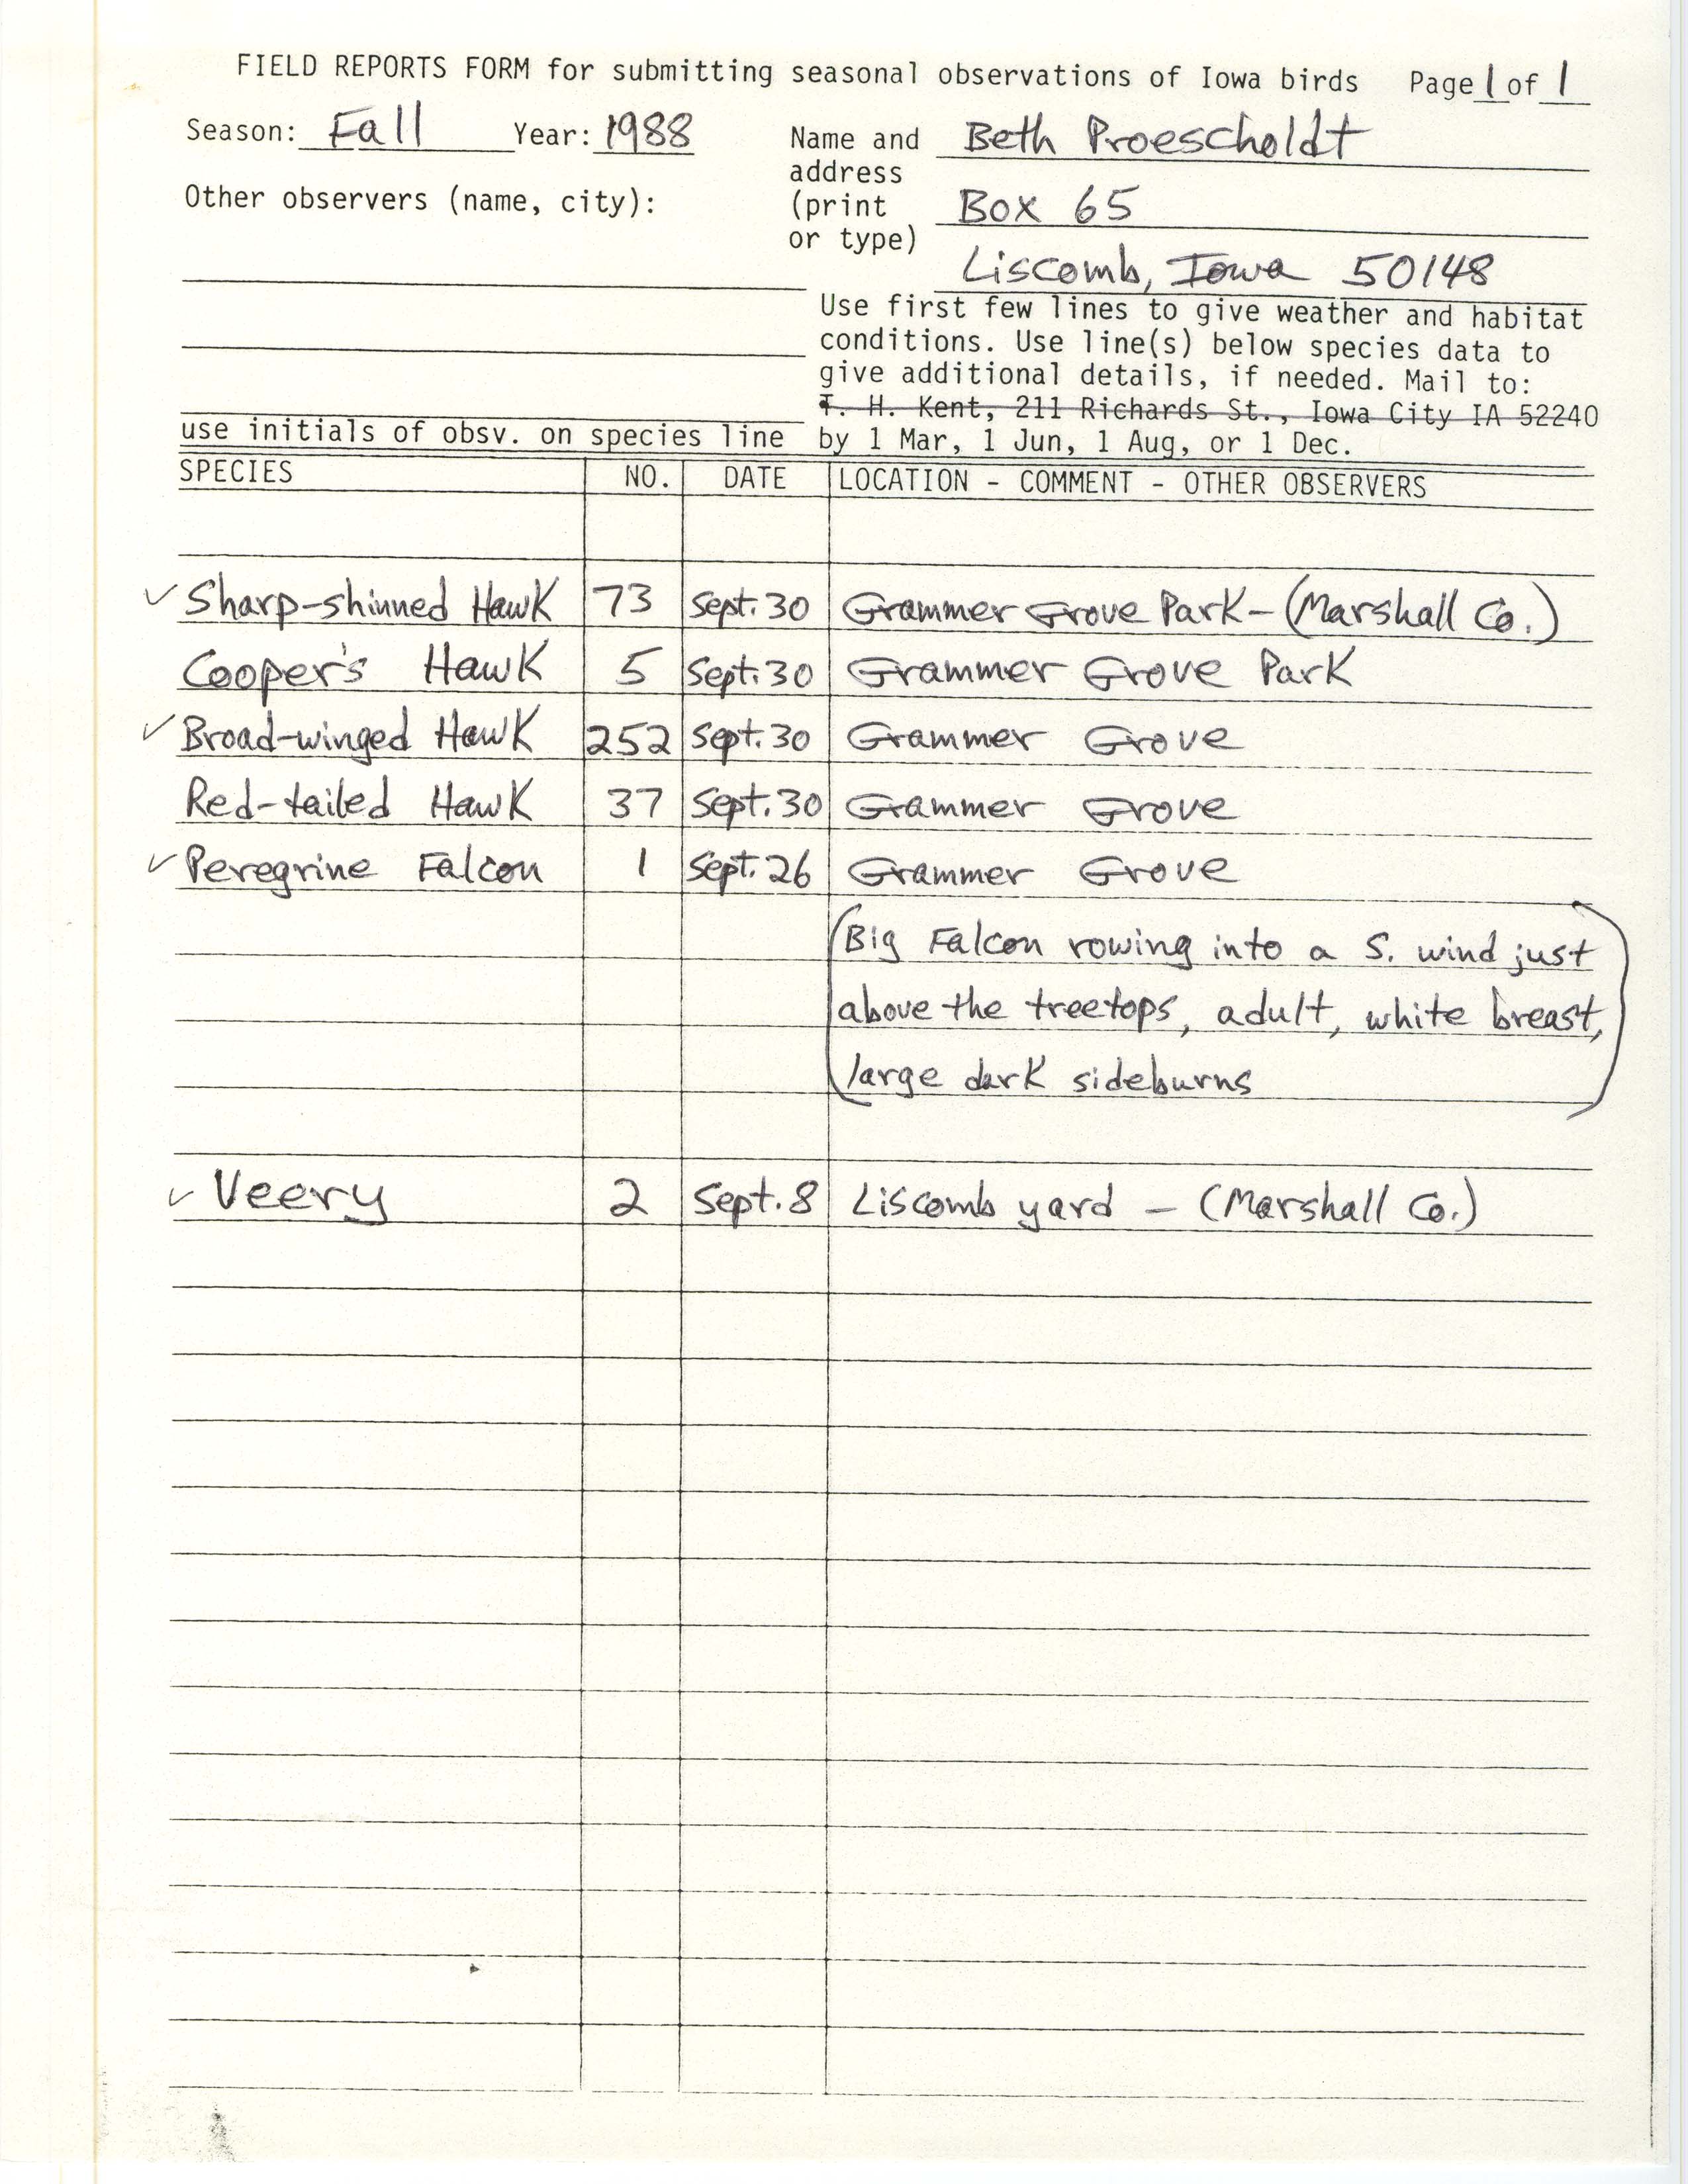 Field reports form for submitting seasonal observations of Iowa birds, Beth Proescholdt, fall 1988